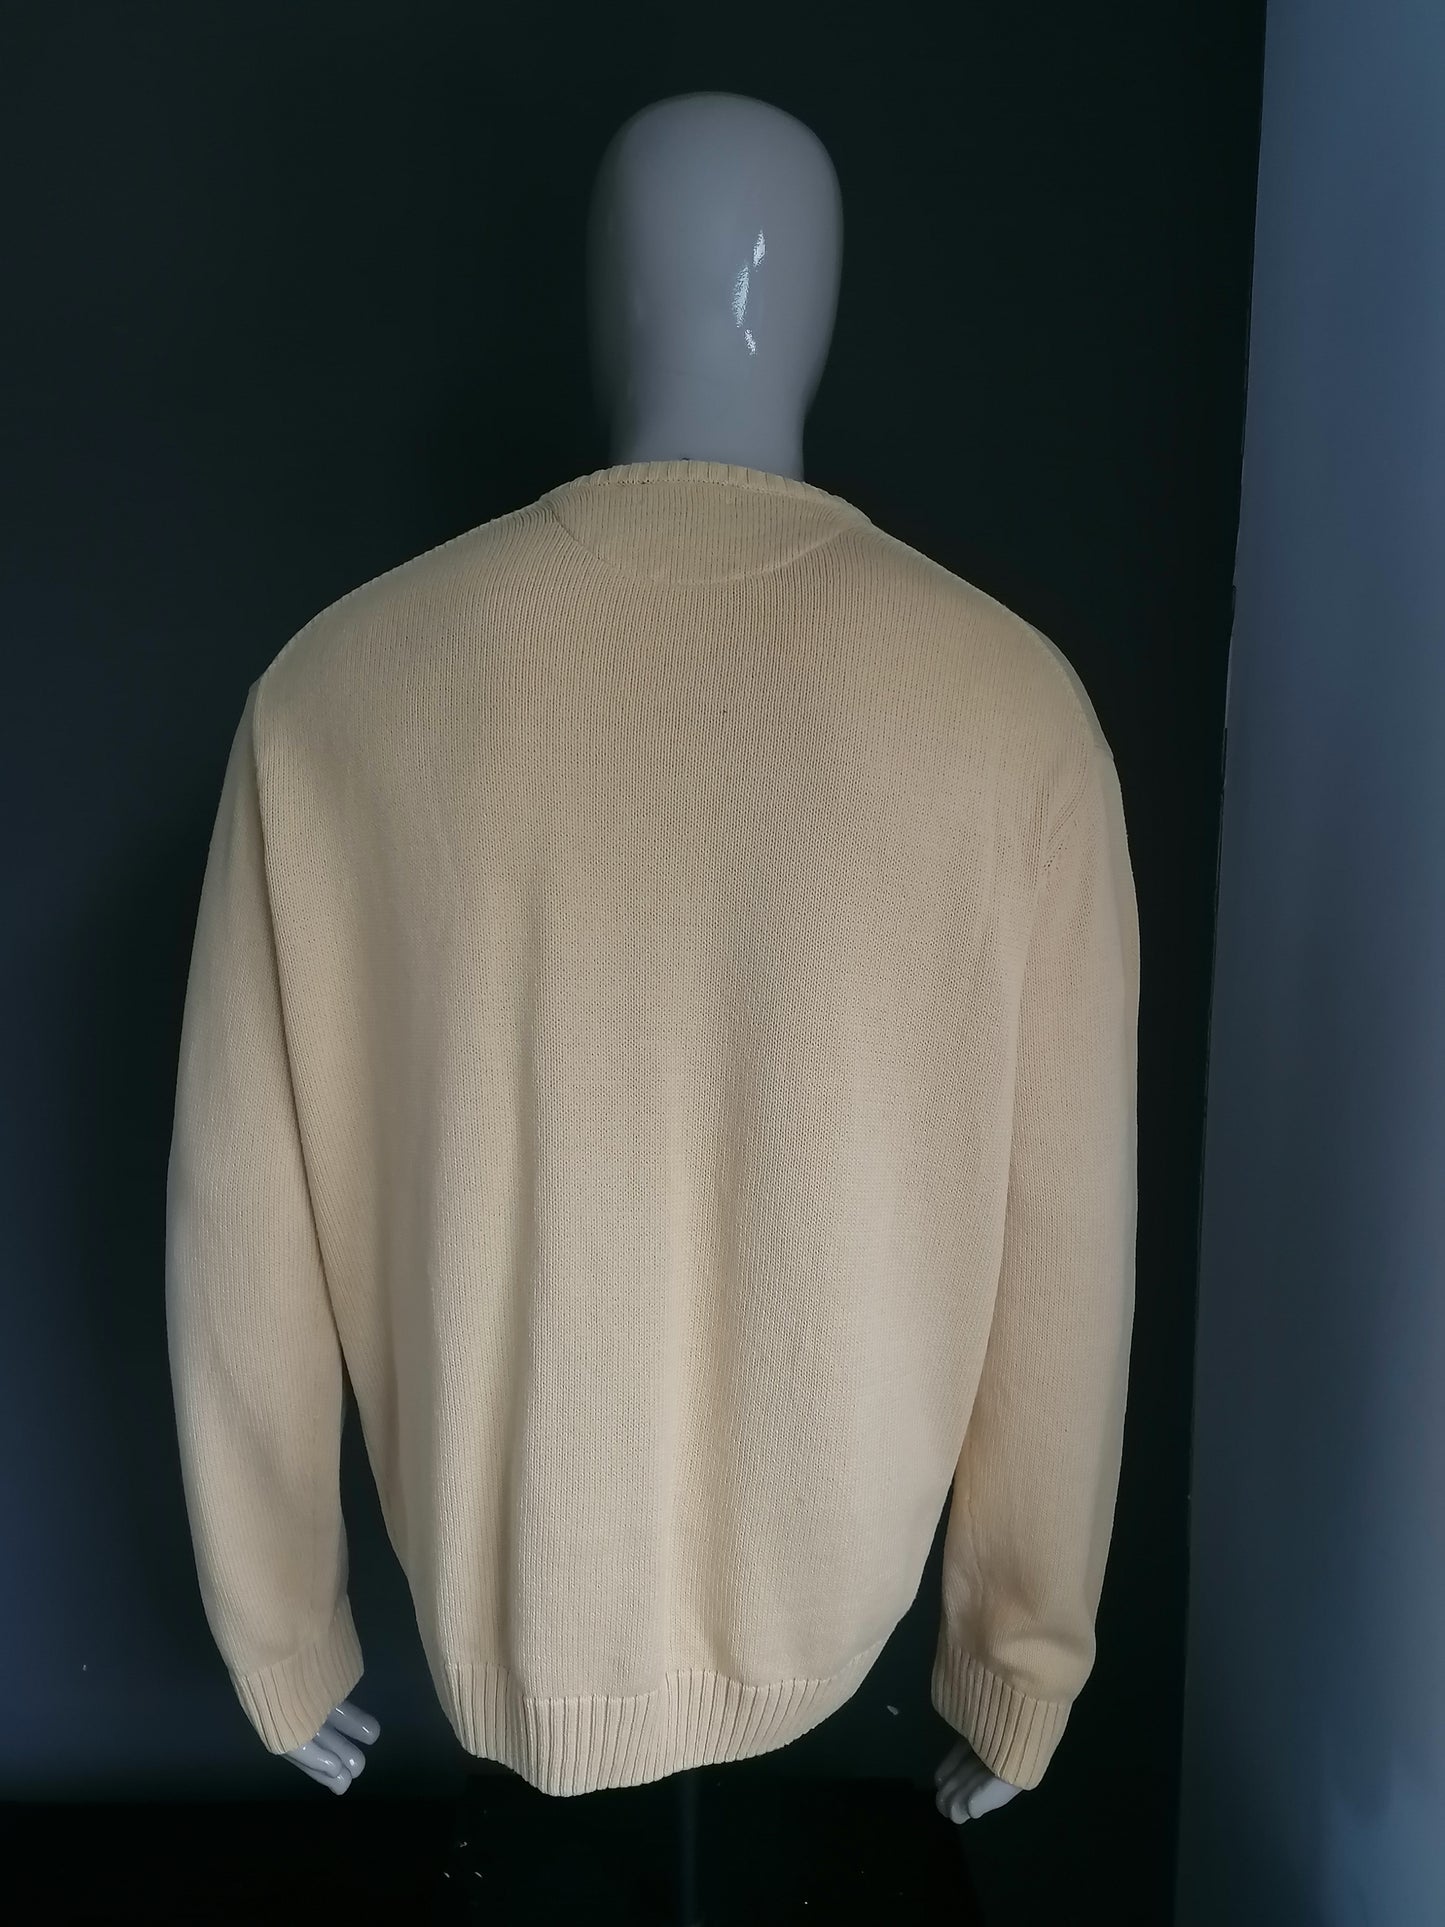 Ny Coton cotton sweater with V-neck. Yellow colored. Size XXL / 2XL.